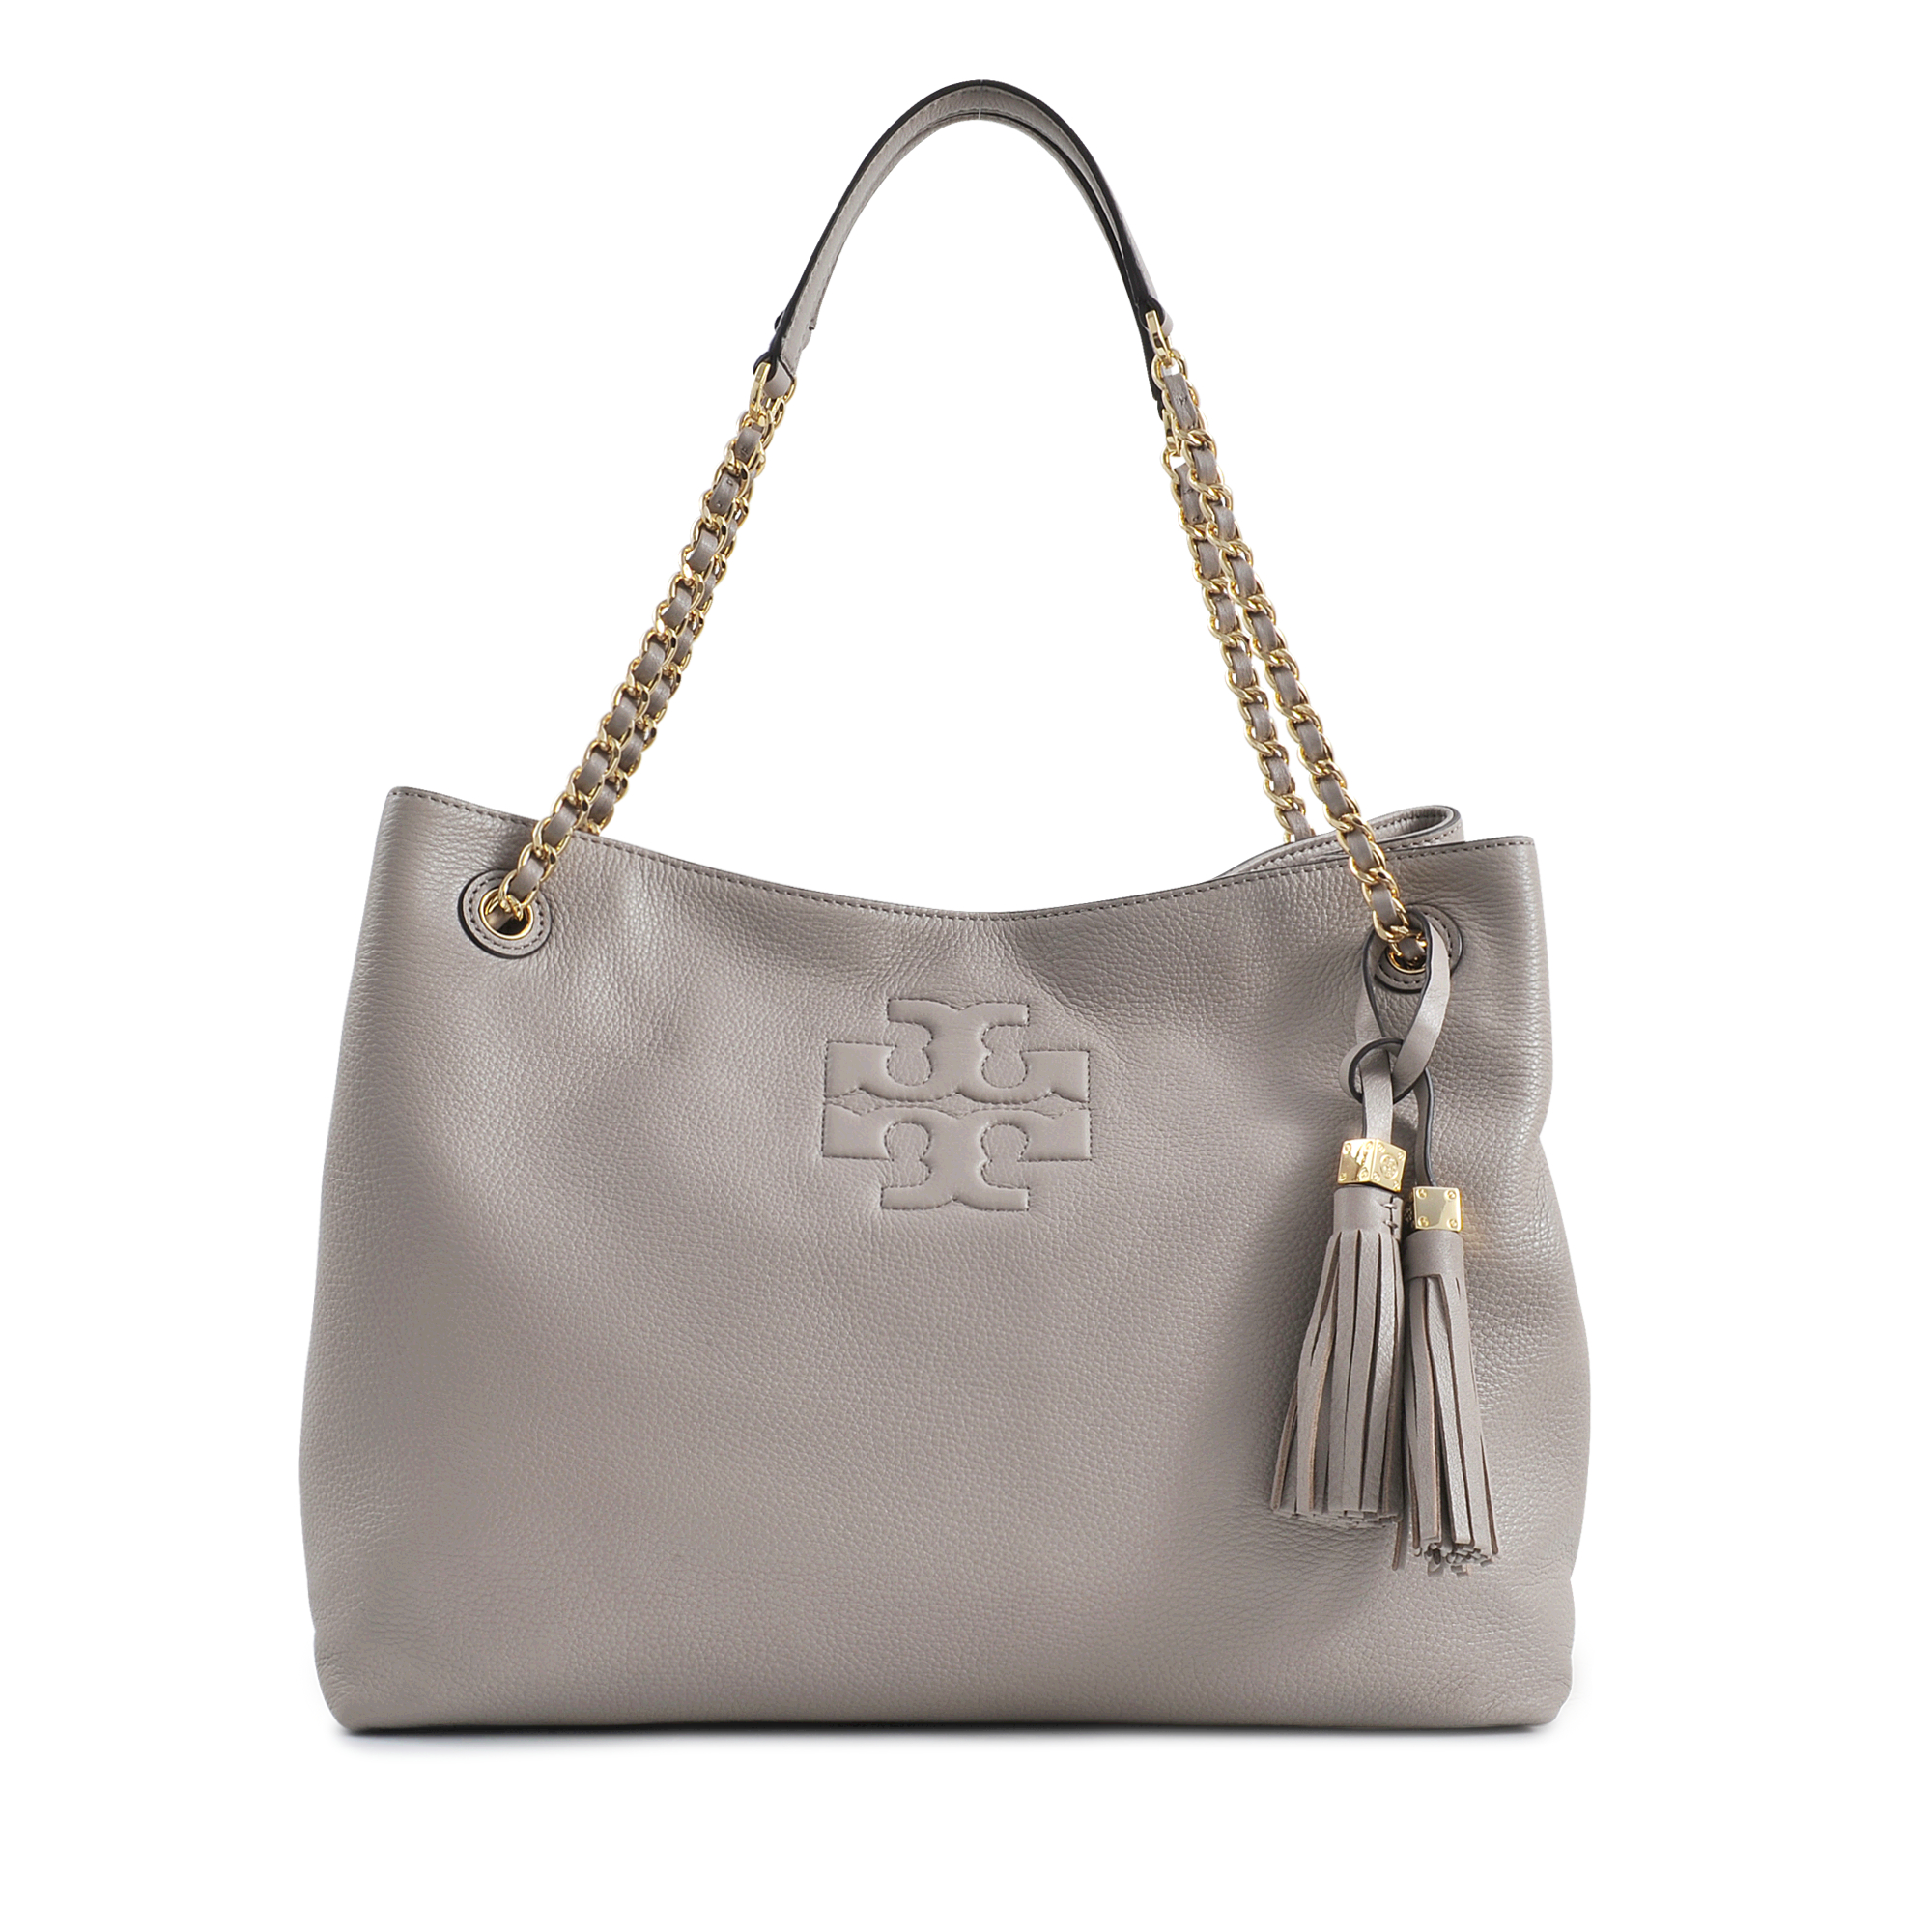 Tory Burch (86884) Thea Small Pebbled Leather Slouchy Shoulder